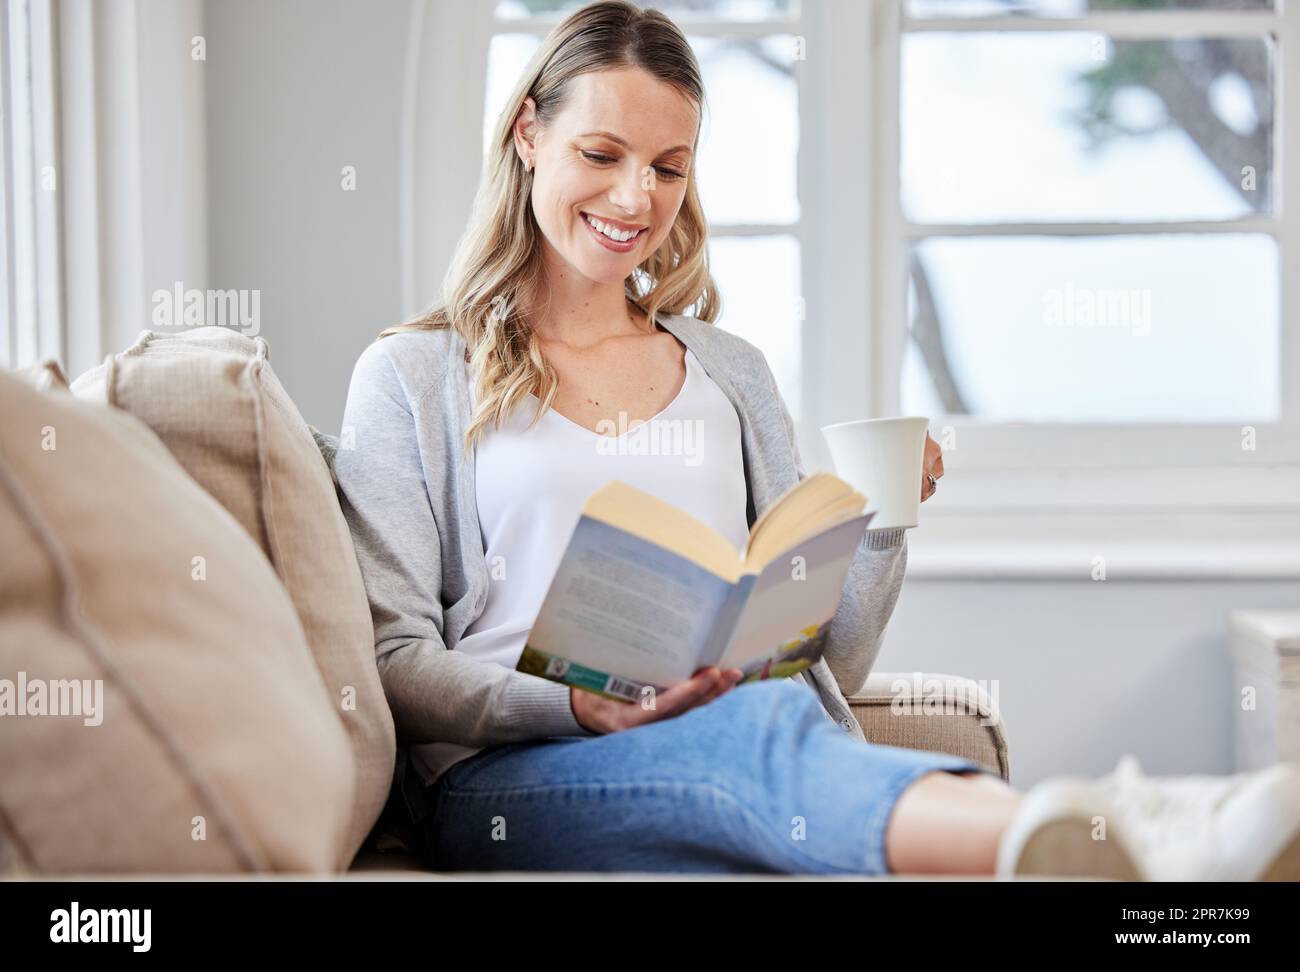 A good book leads to a good mood. a young woman reading a book while relaxing on a sofa at home. Stock Photo